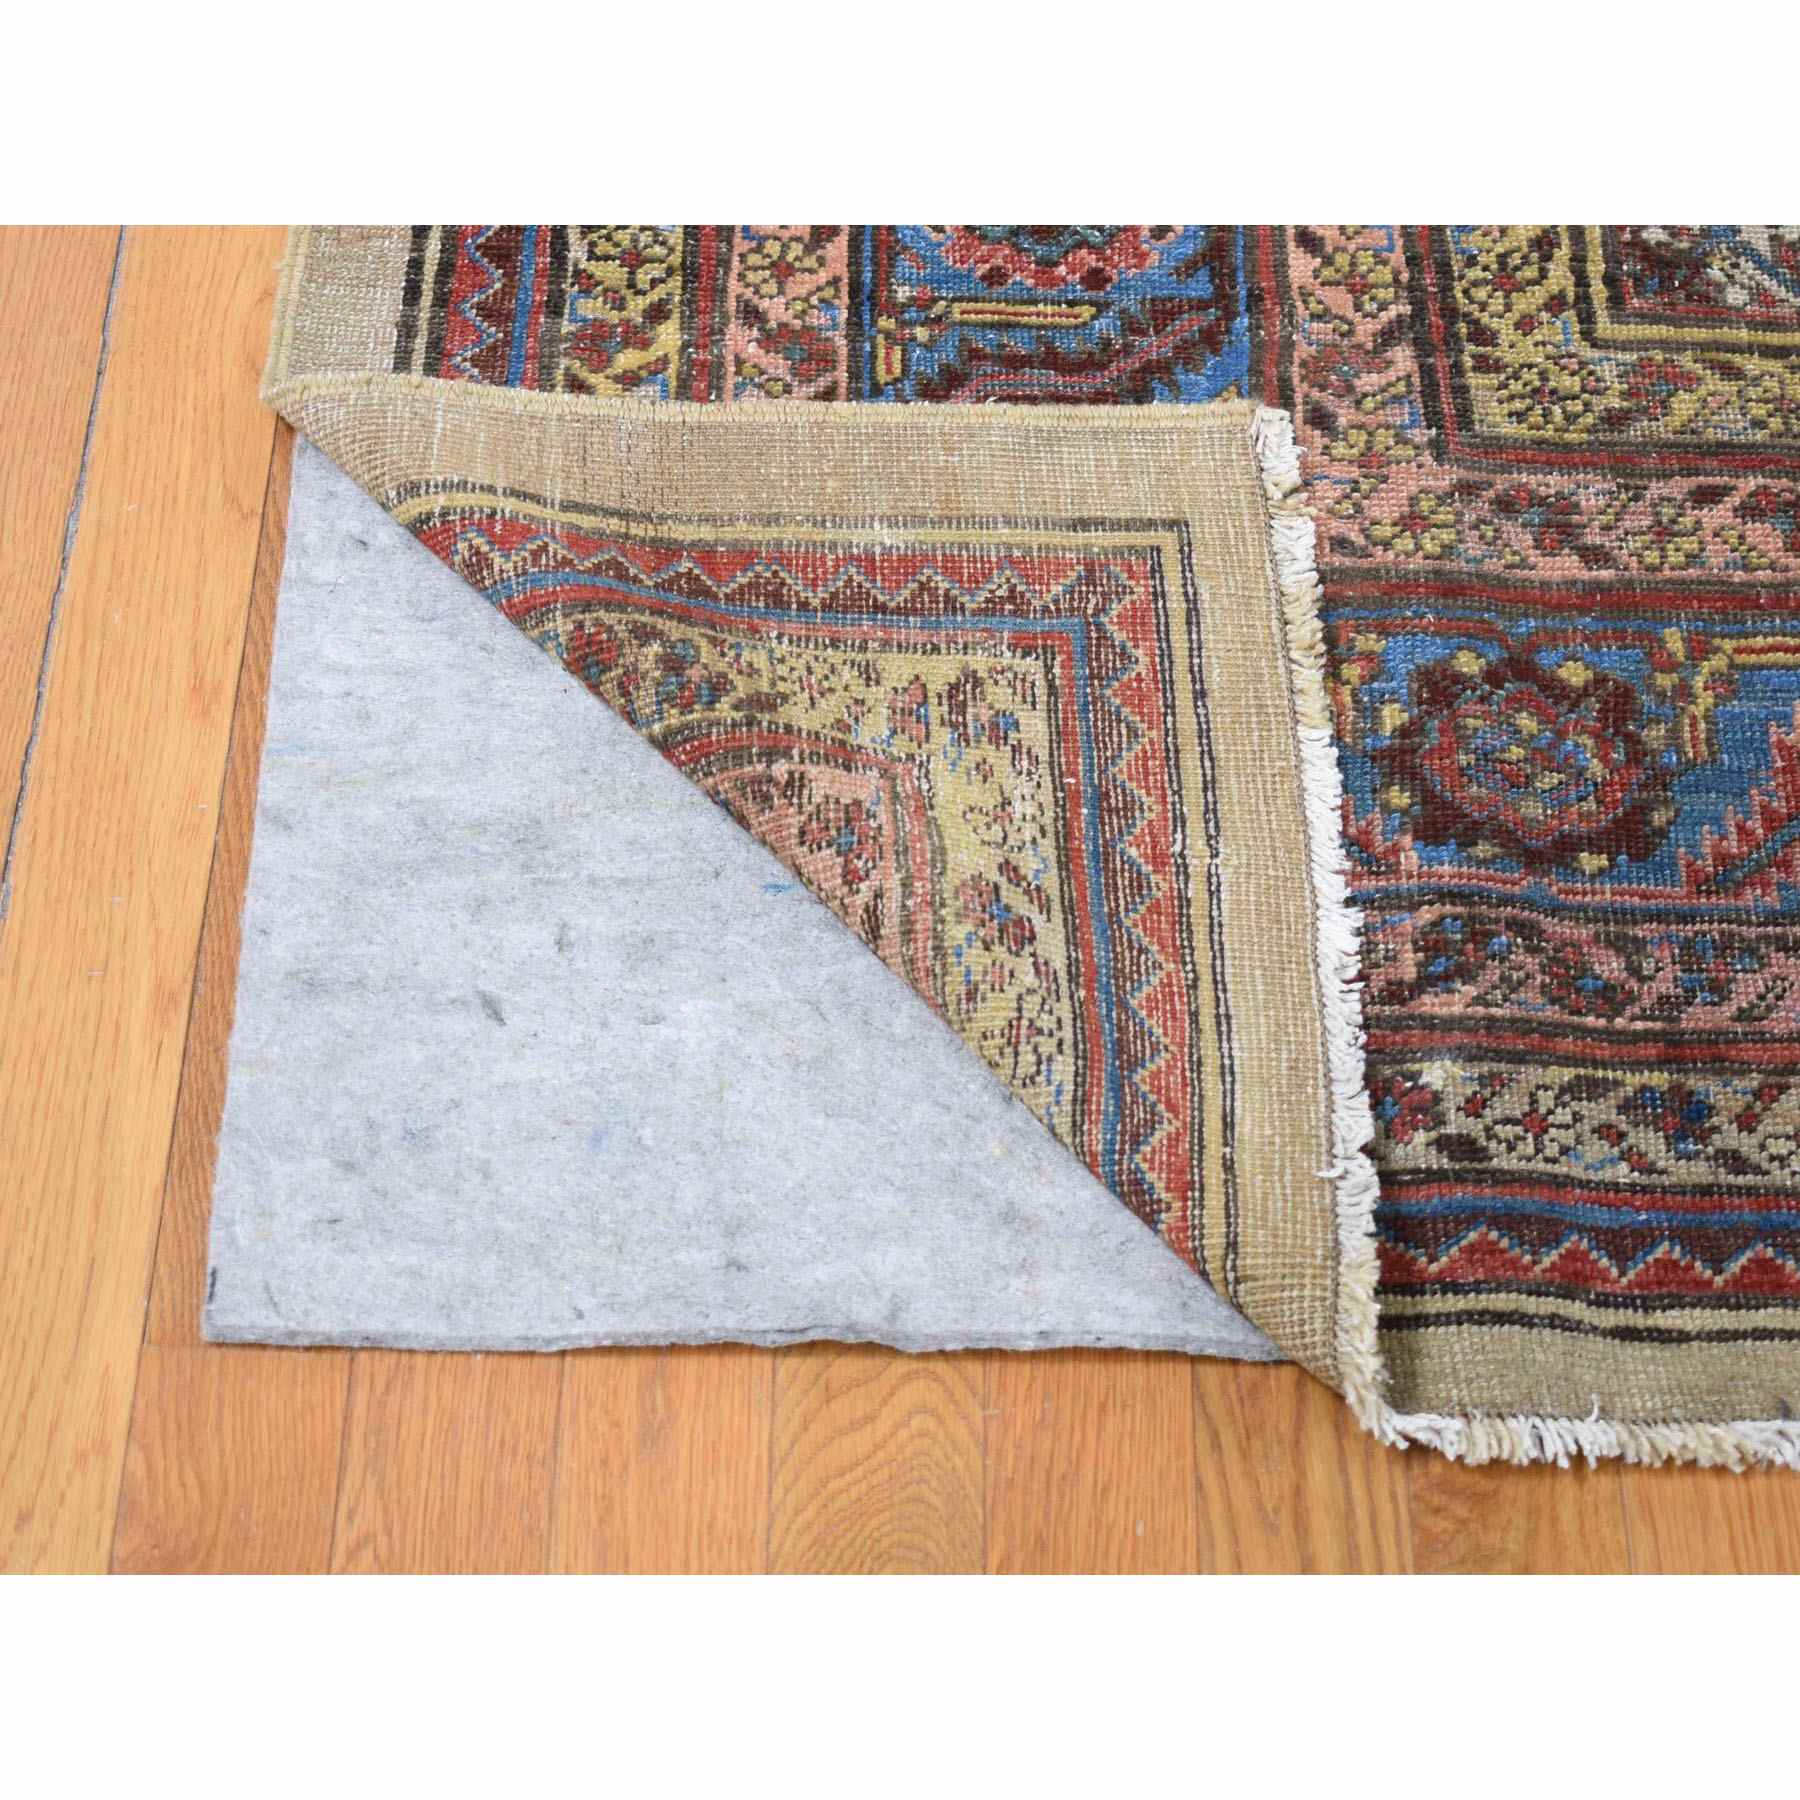 Antique-Hand-Knotted-Rug-402620